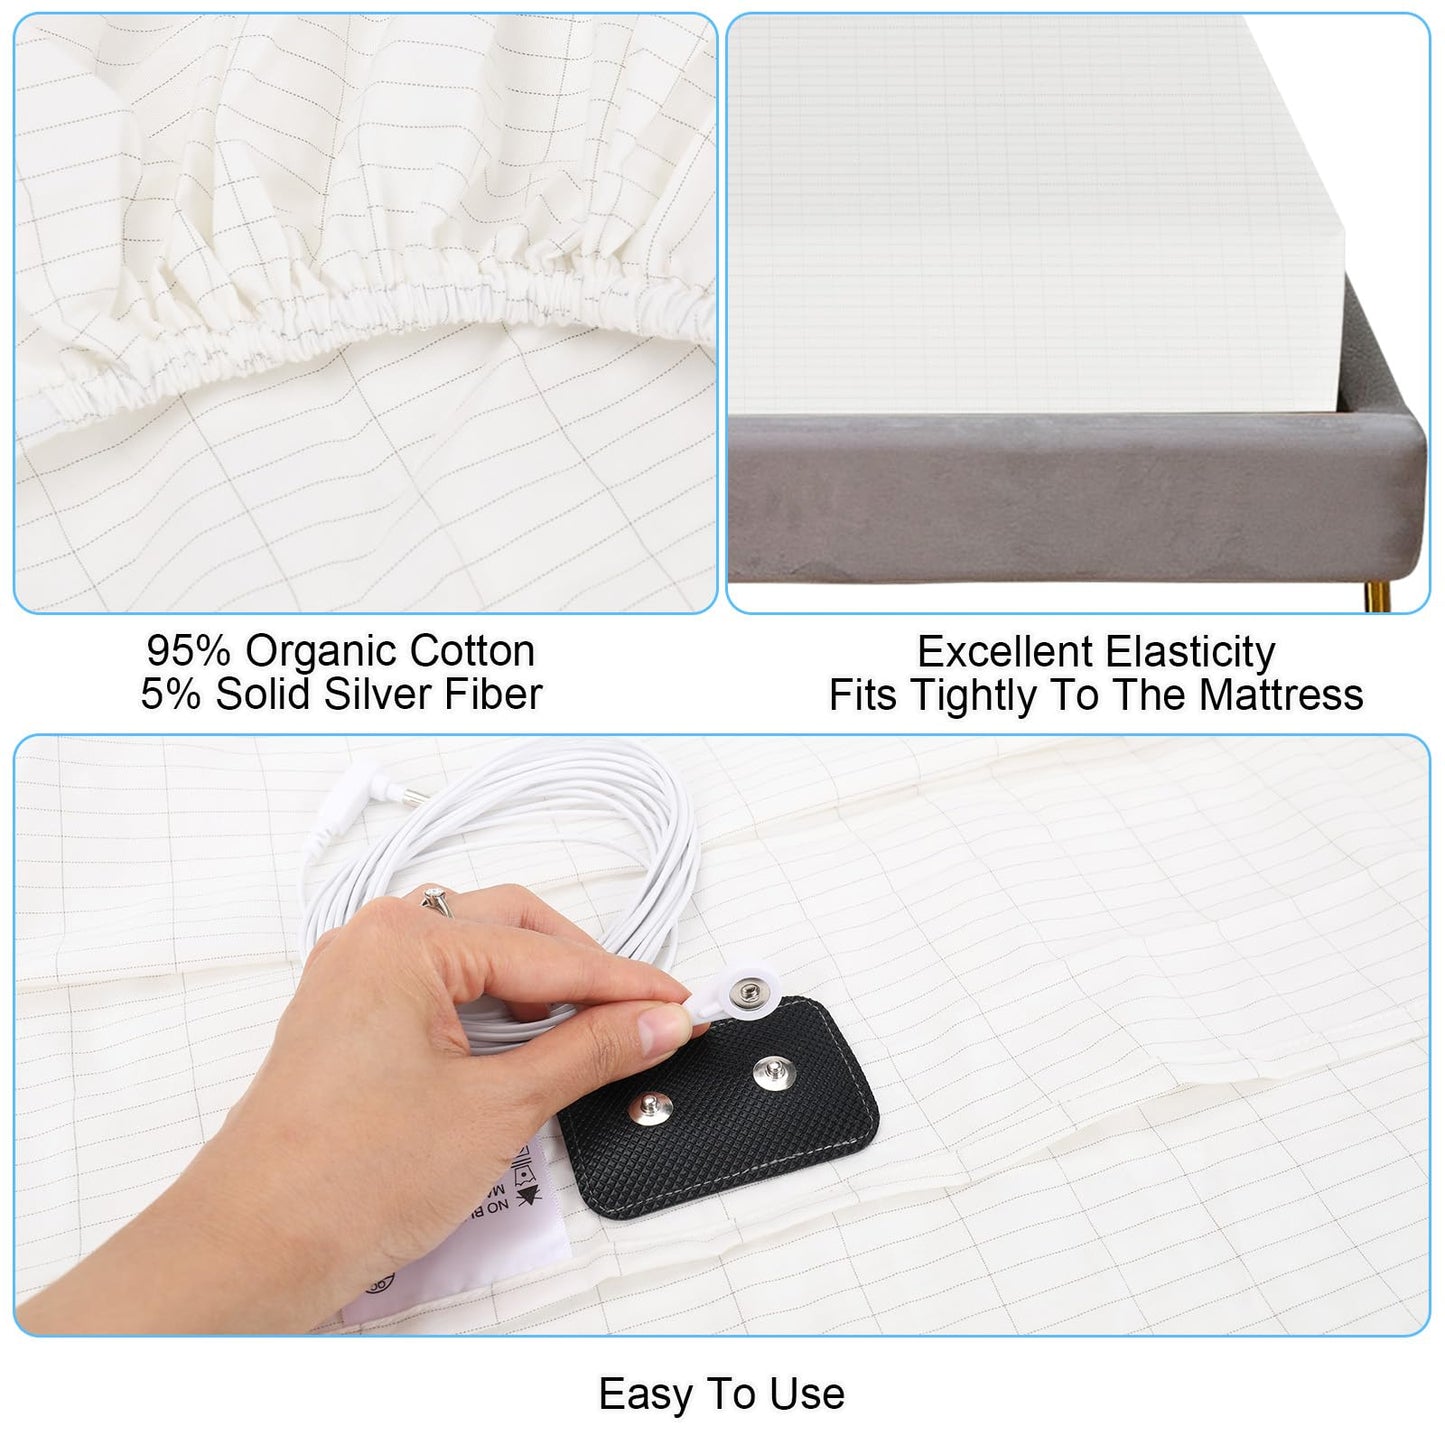 ConBlom Grounding Fitted Sheet with Grounding Cord, Earthing Sheets King Size, 5% Silver Fiber & 95% Cotton Fiber, Conductive Earthing Bed Sheet for Better Sleep (White, King)